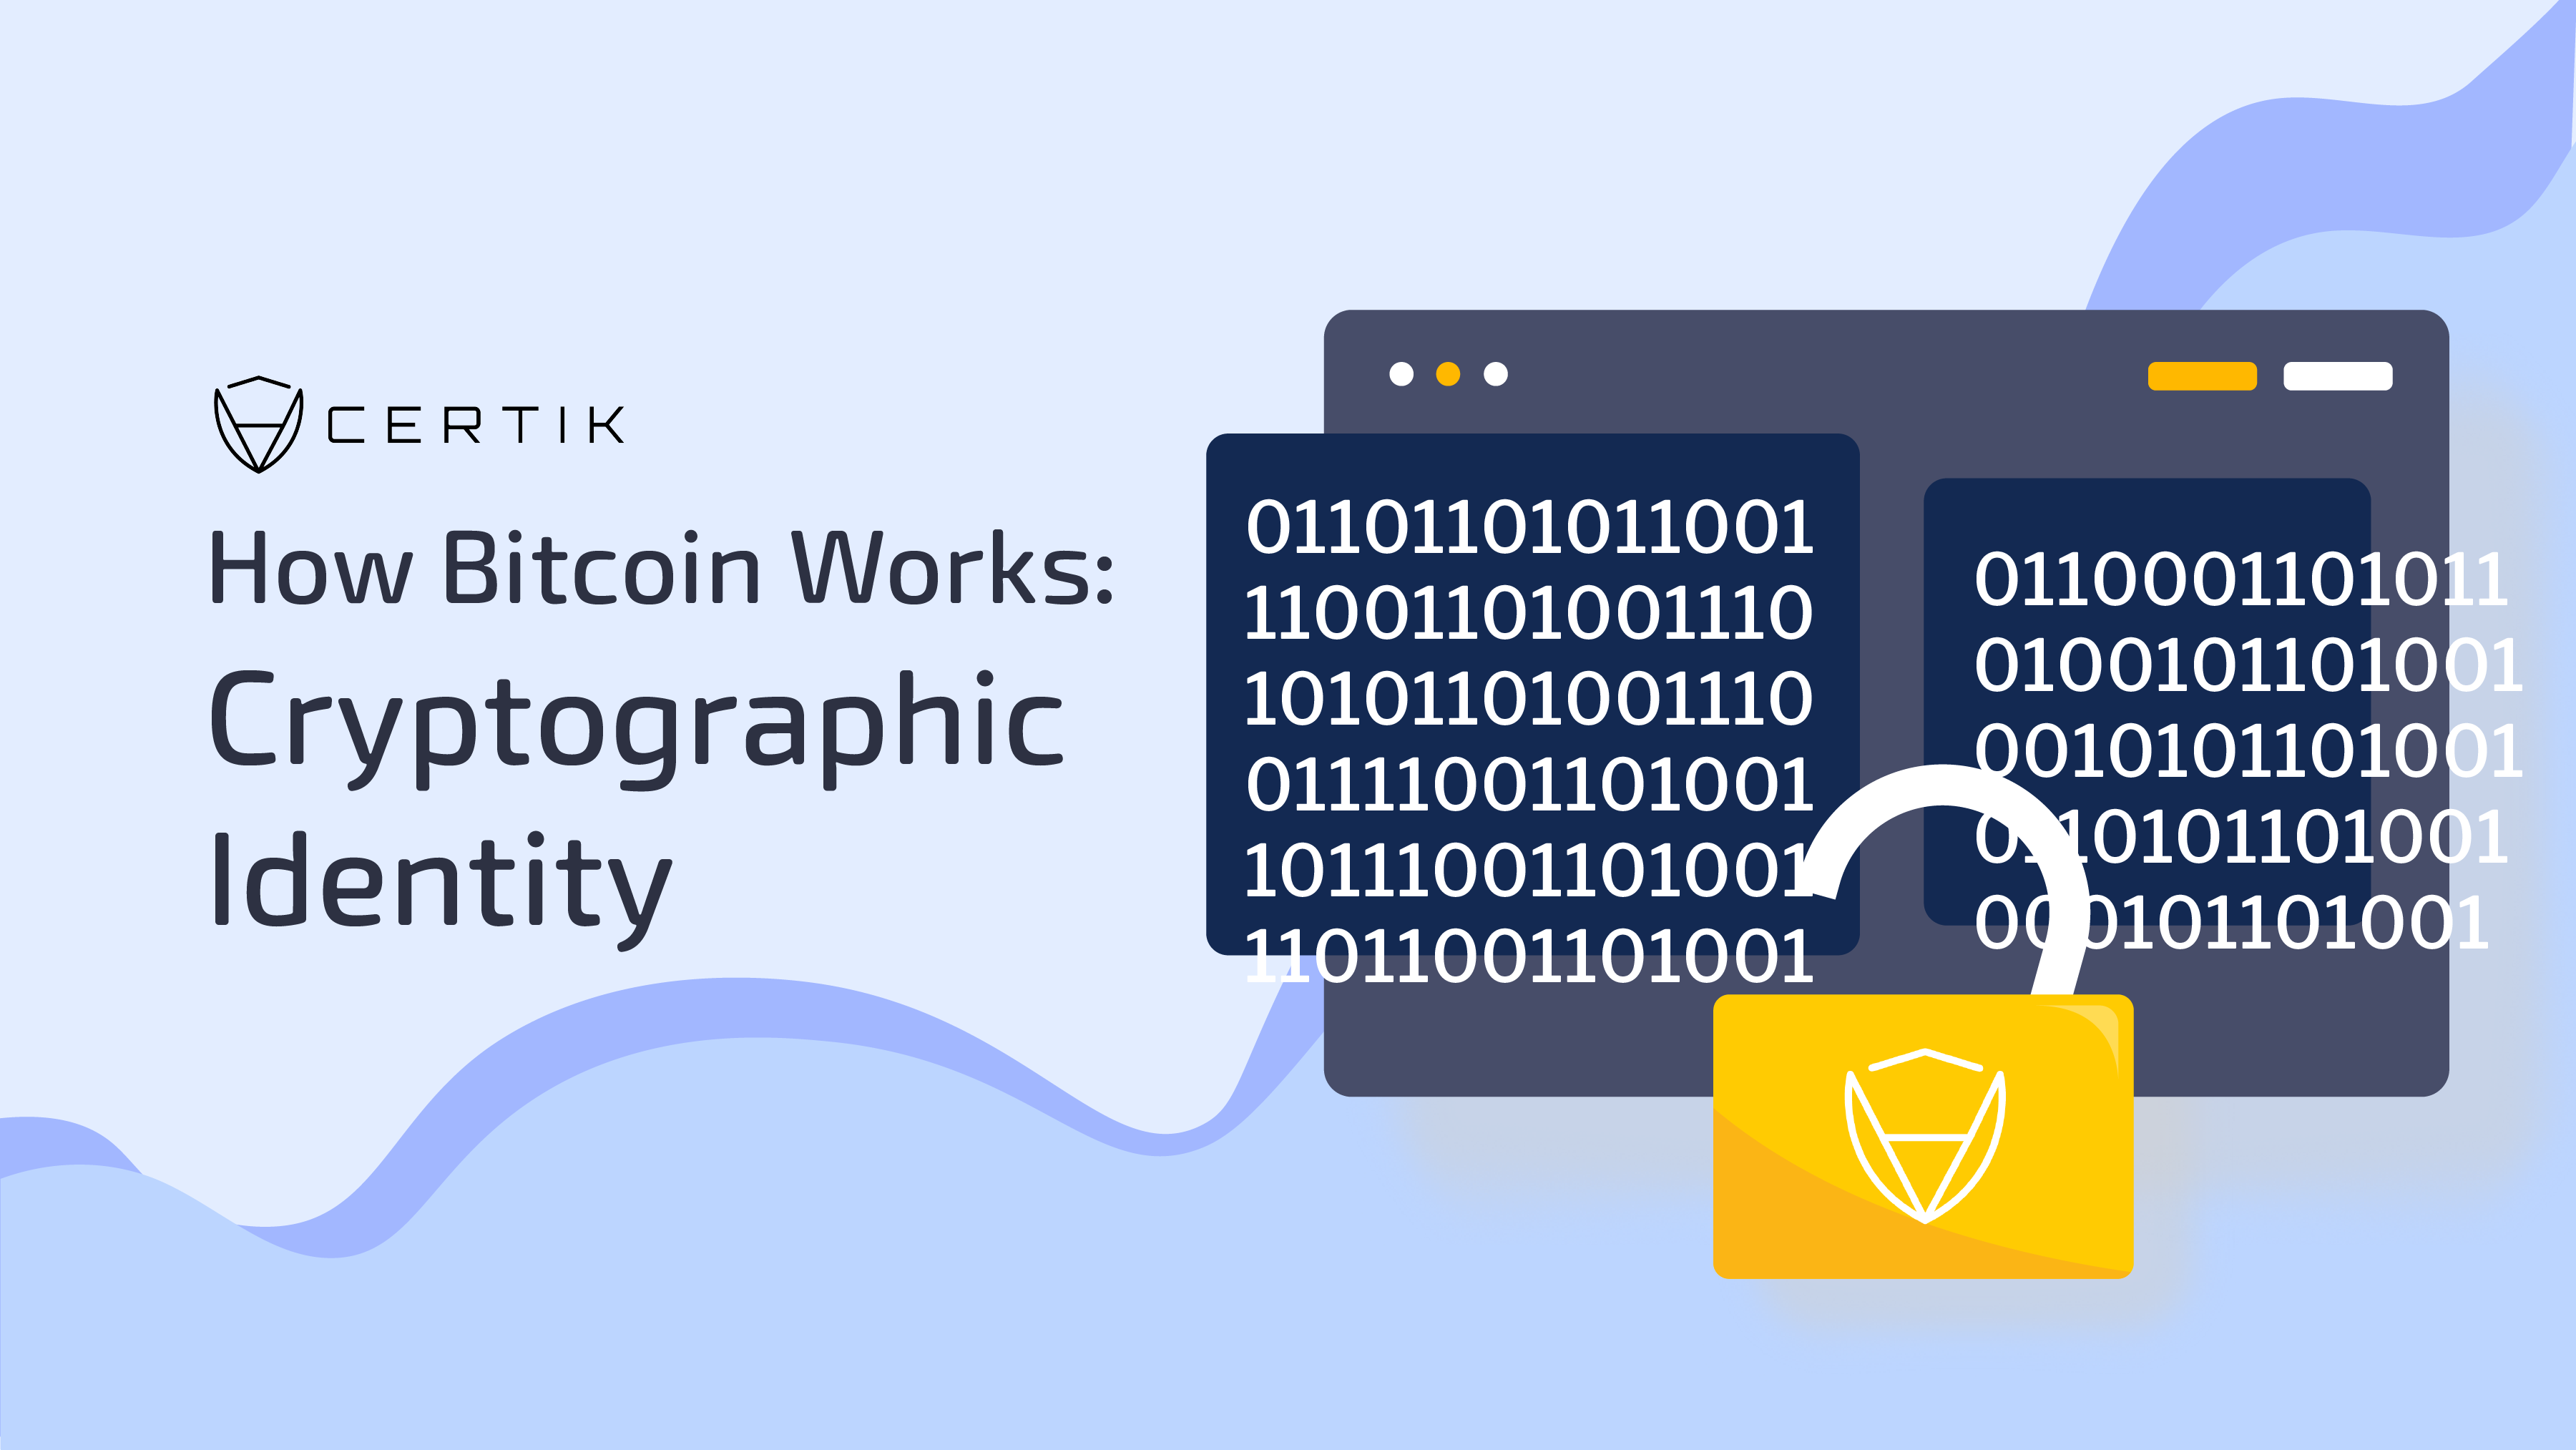 How Bitcoin Works: Cryptographic Identity